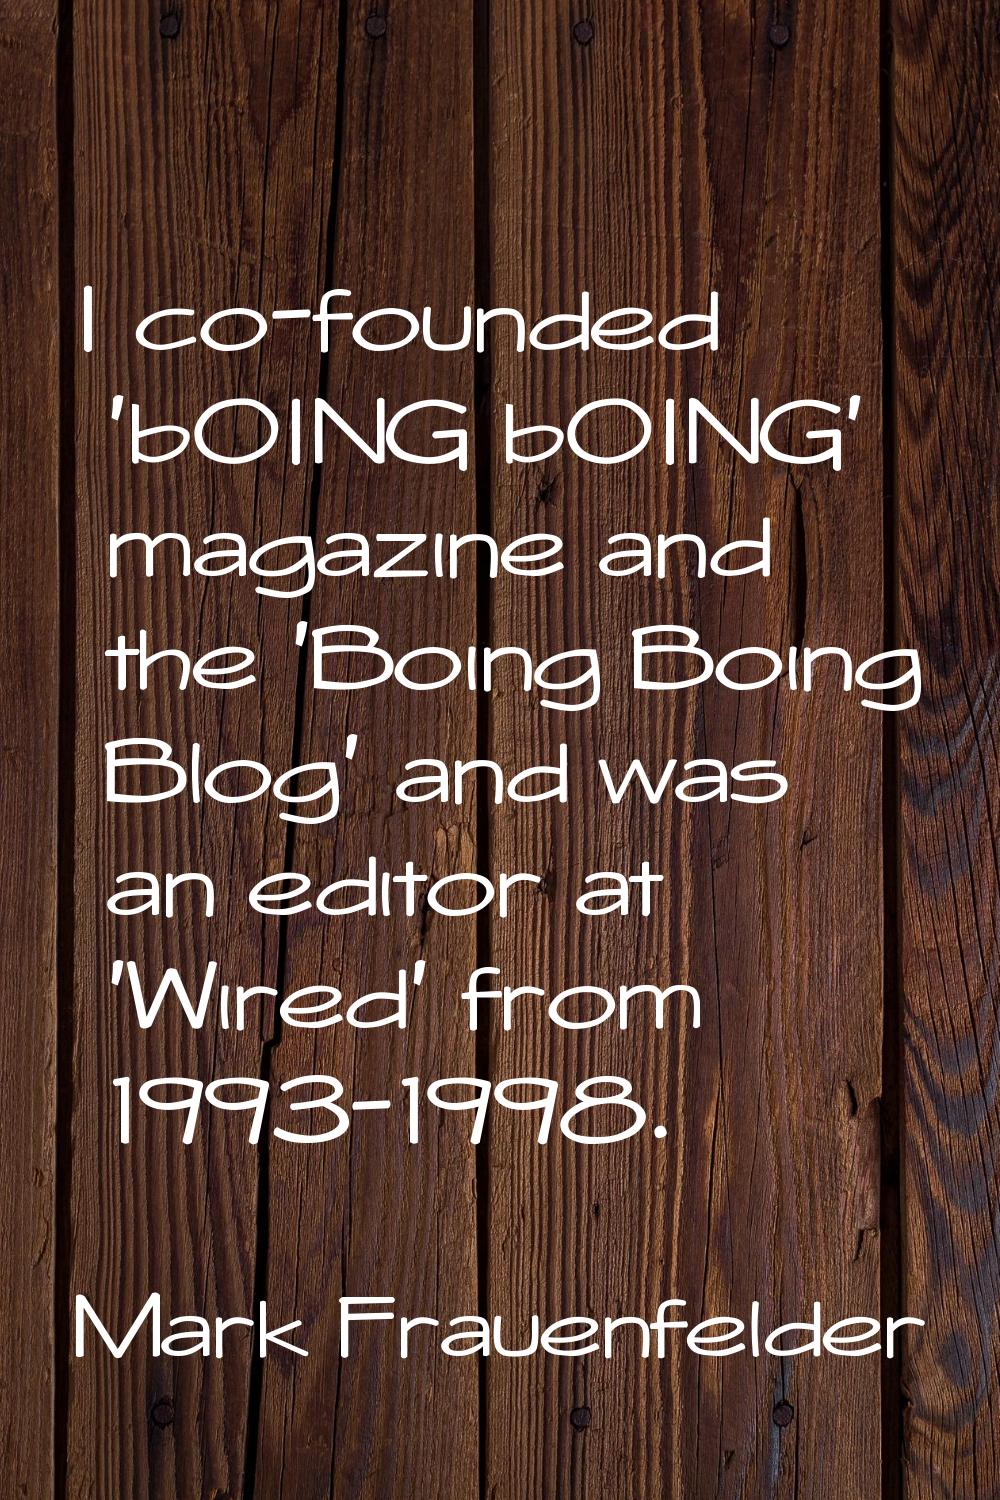 I co-founded 'bOING bOING' magazine and the 'Boing Boing Blog' and was an editor at 'Wired' from 19